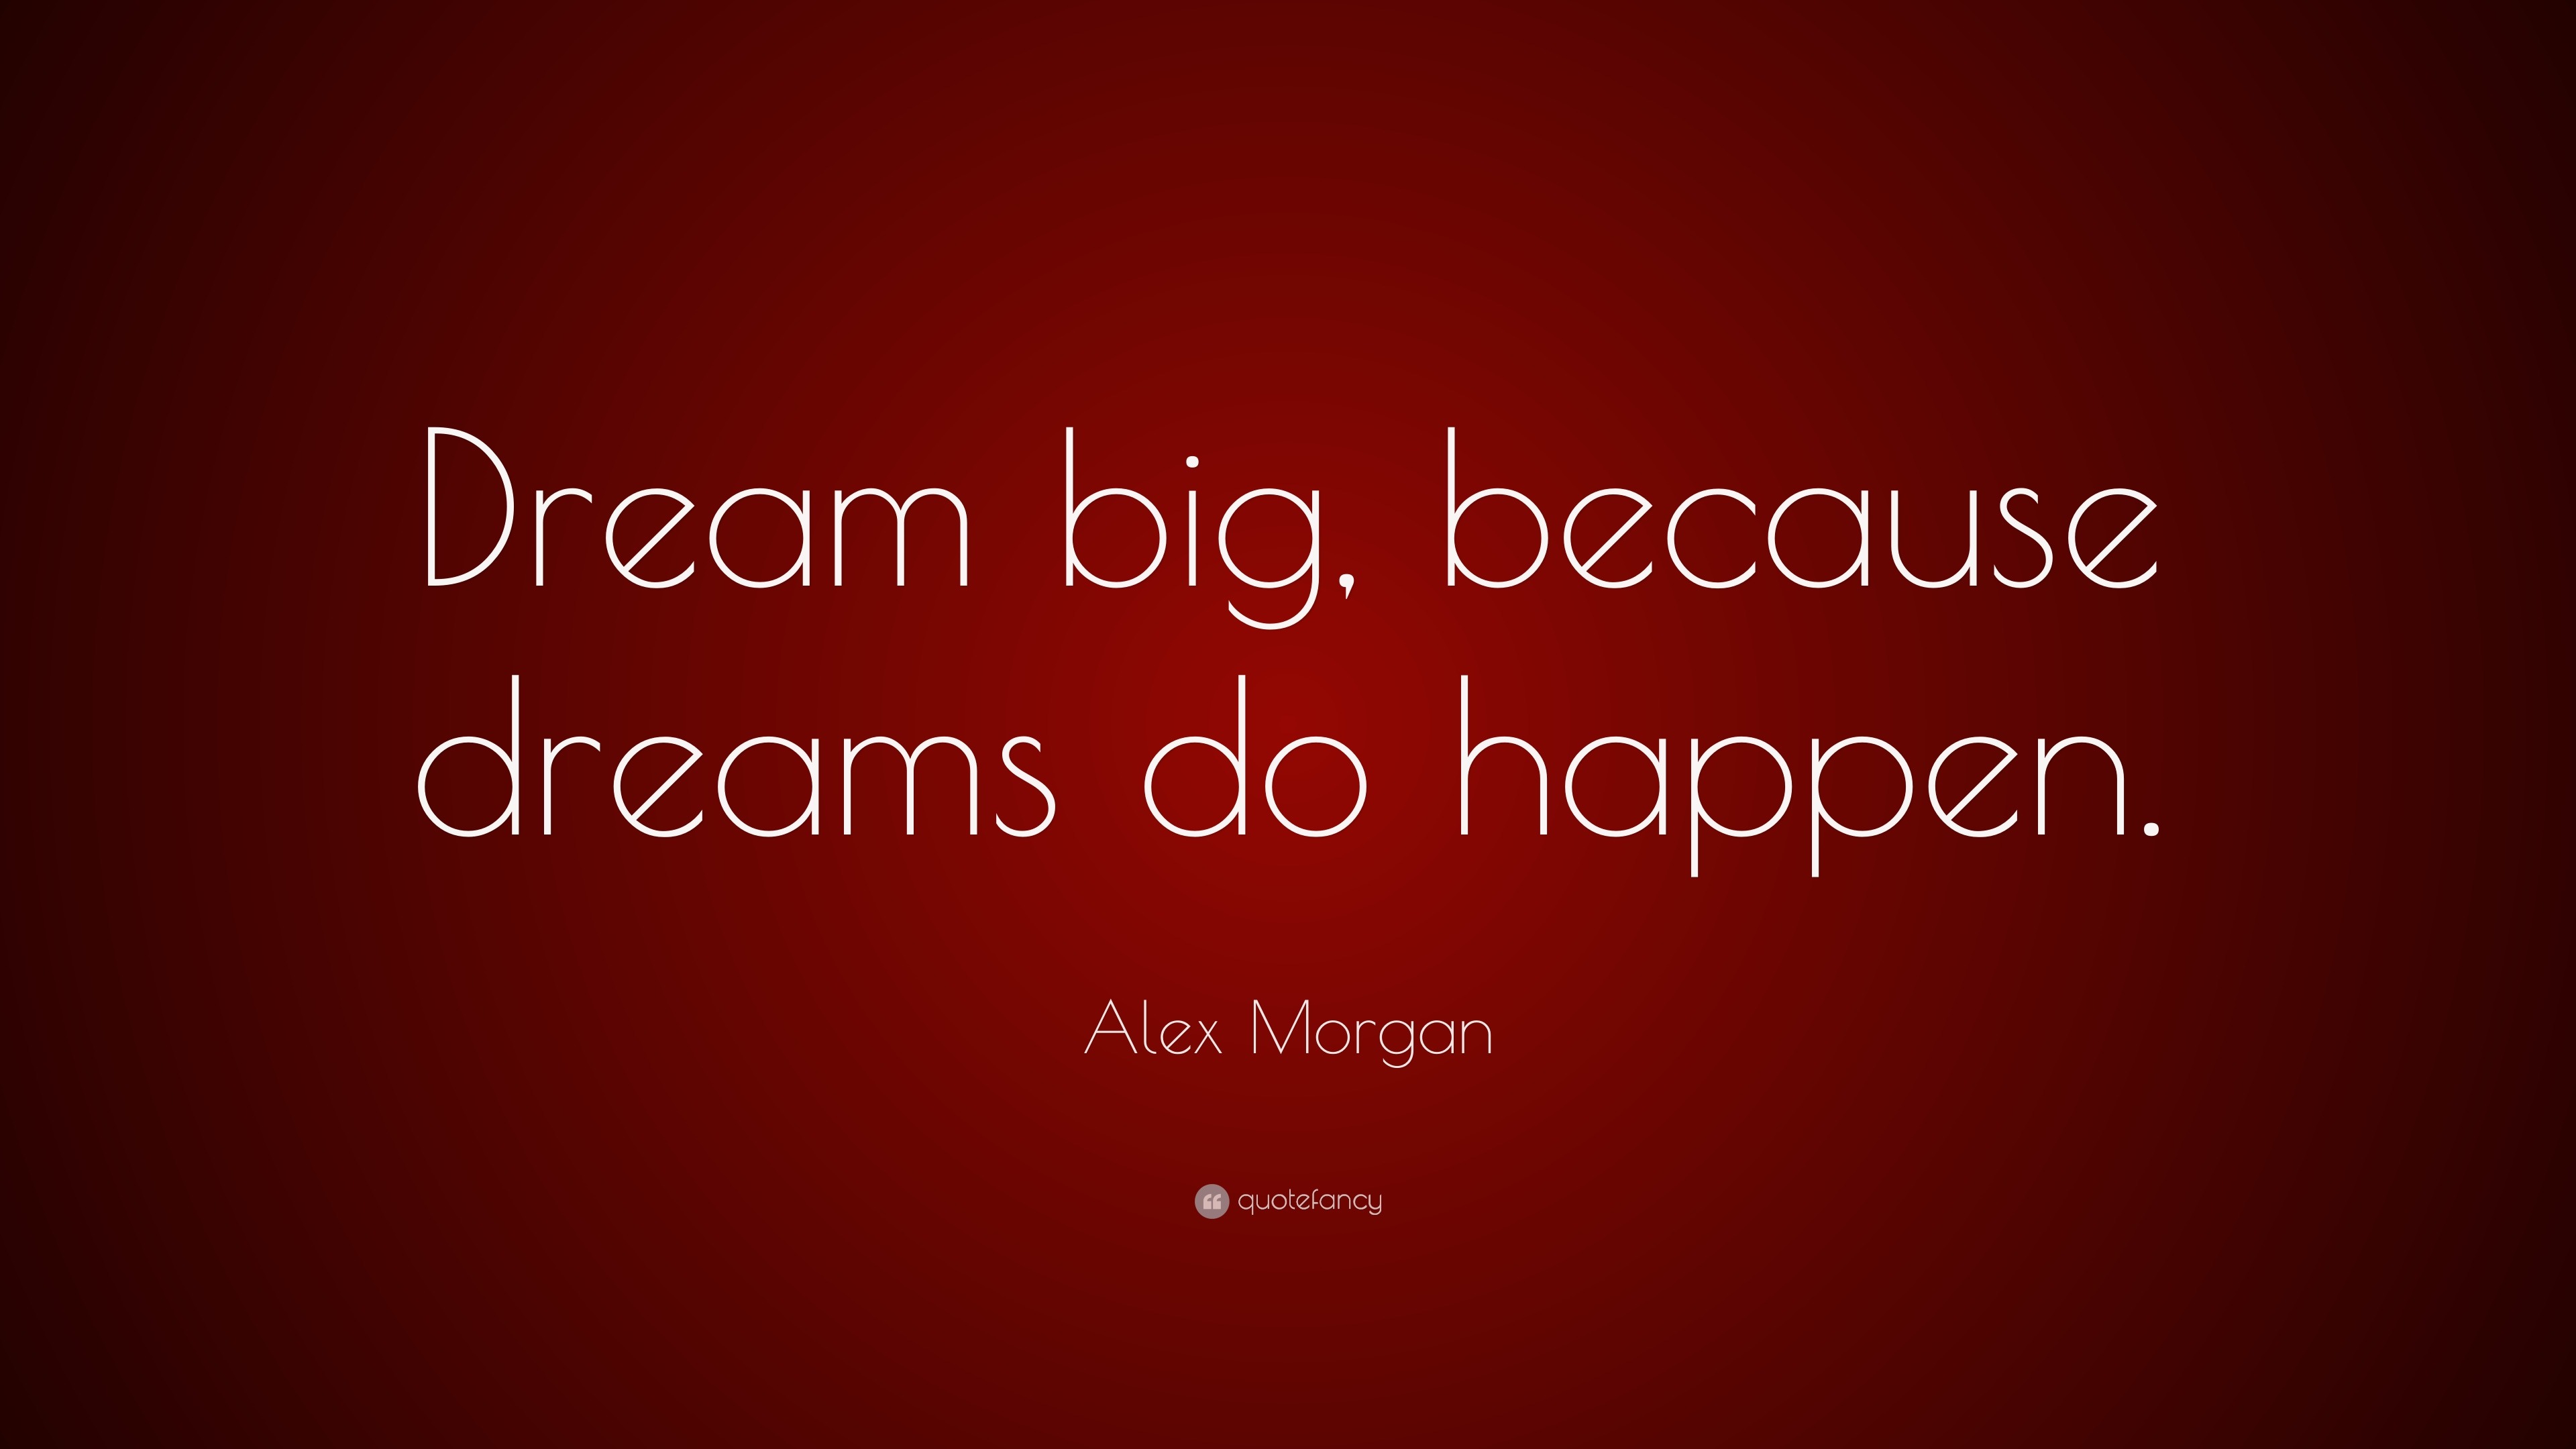 You can dream my dream. Dream цитаты. Dream quotes. Quotes about Dreams. Обои на рабочий стол Dream big.